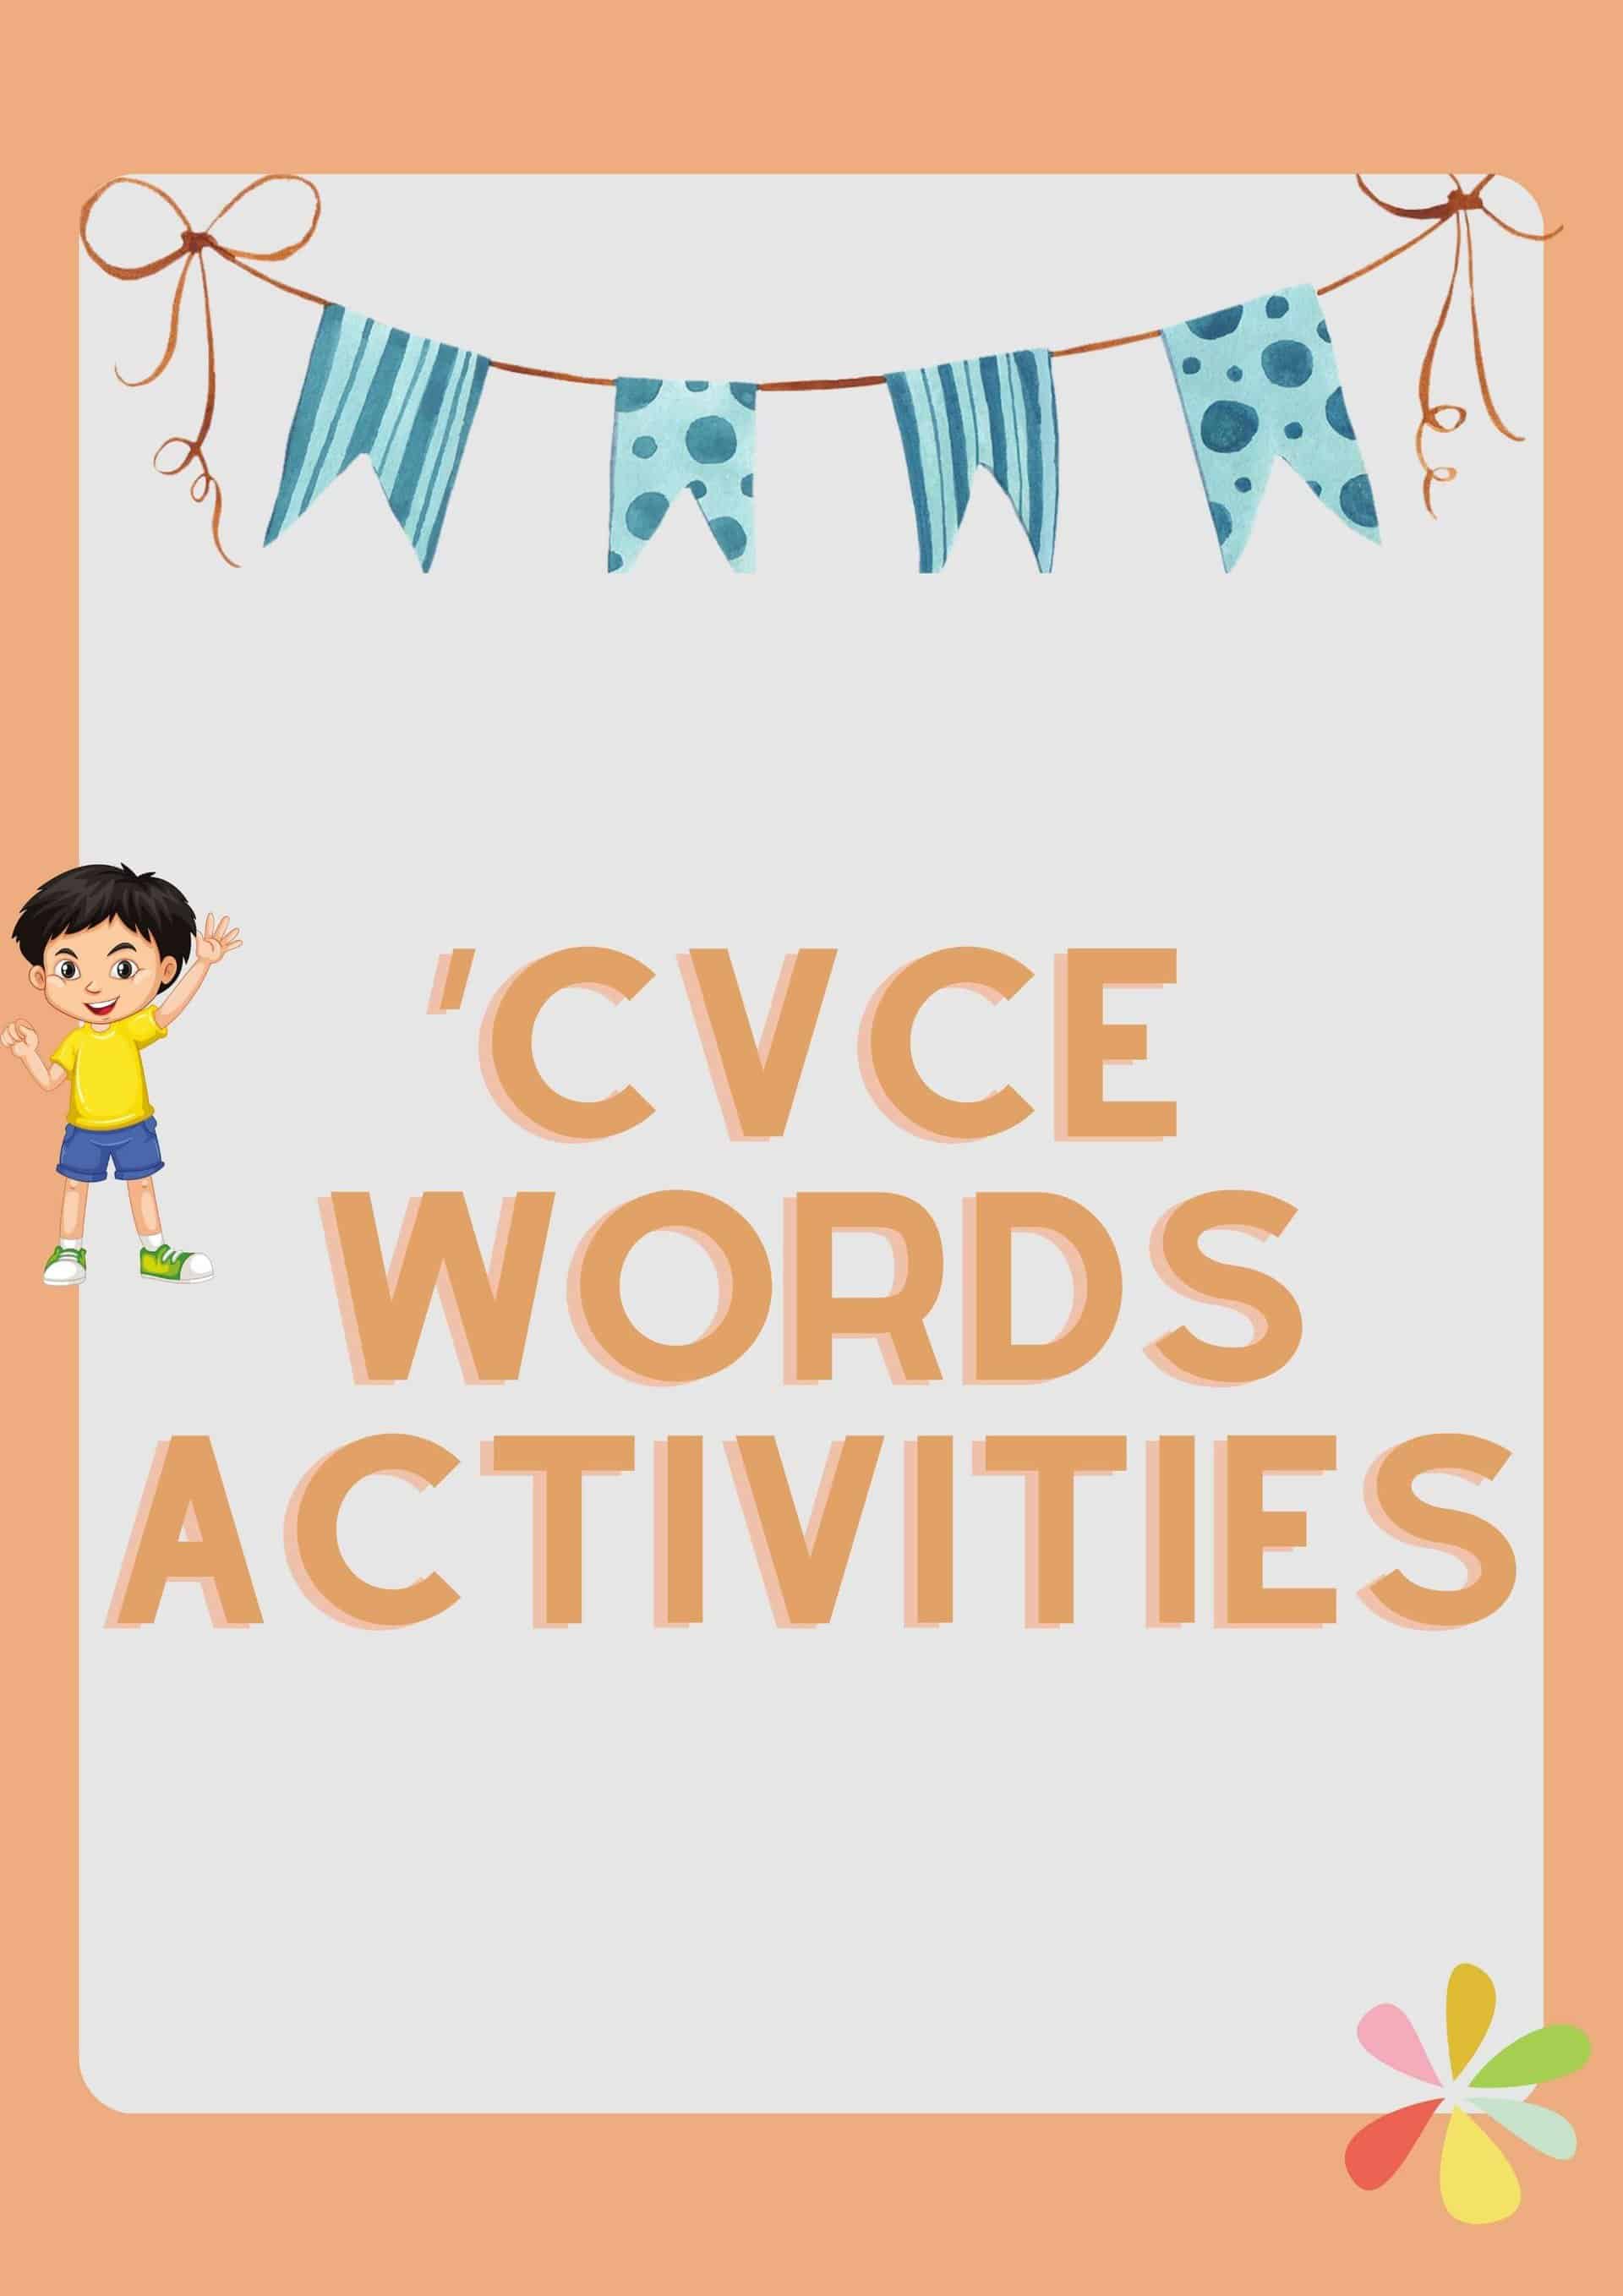 CVCe words activities to understand CVCe words with pictures